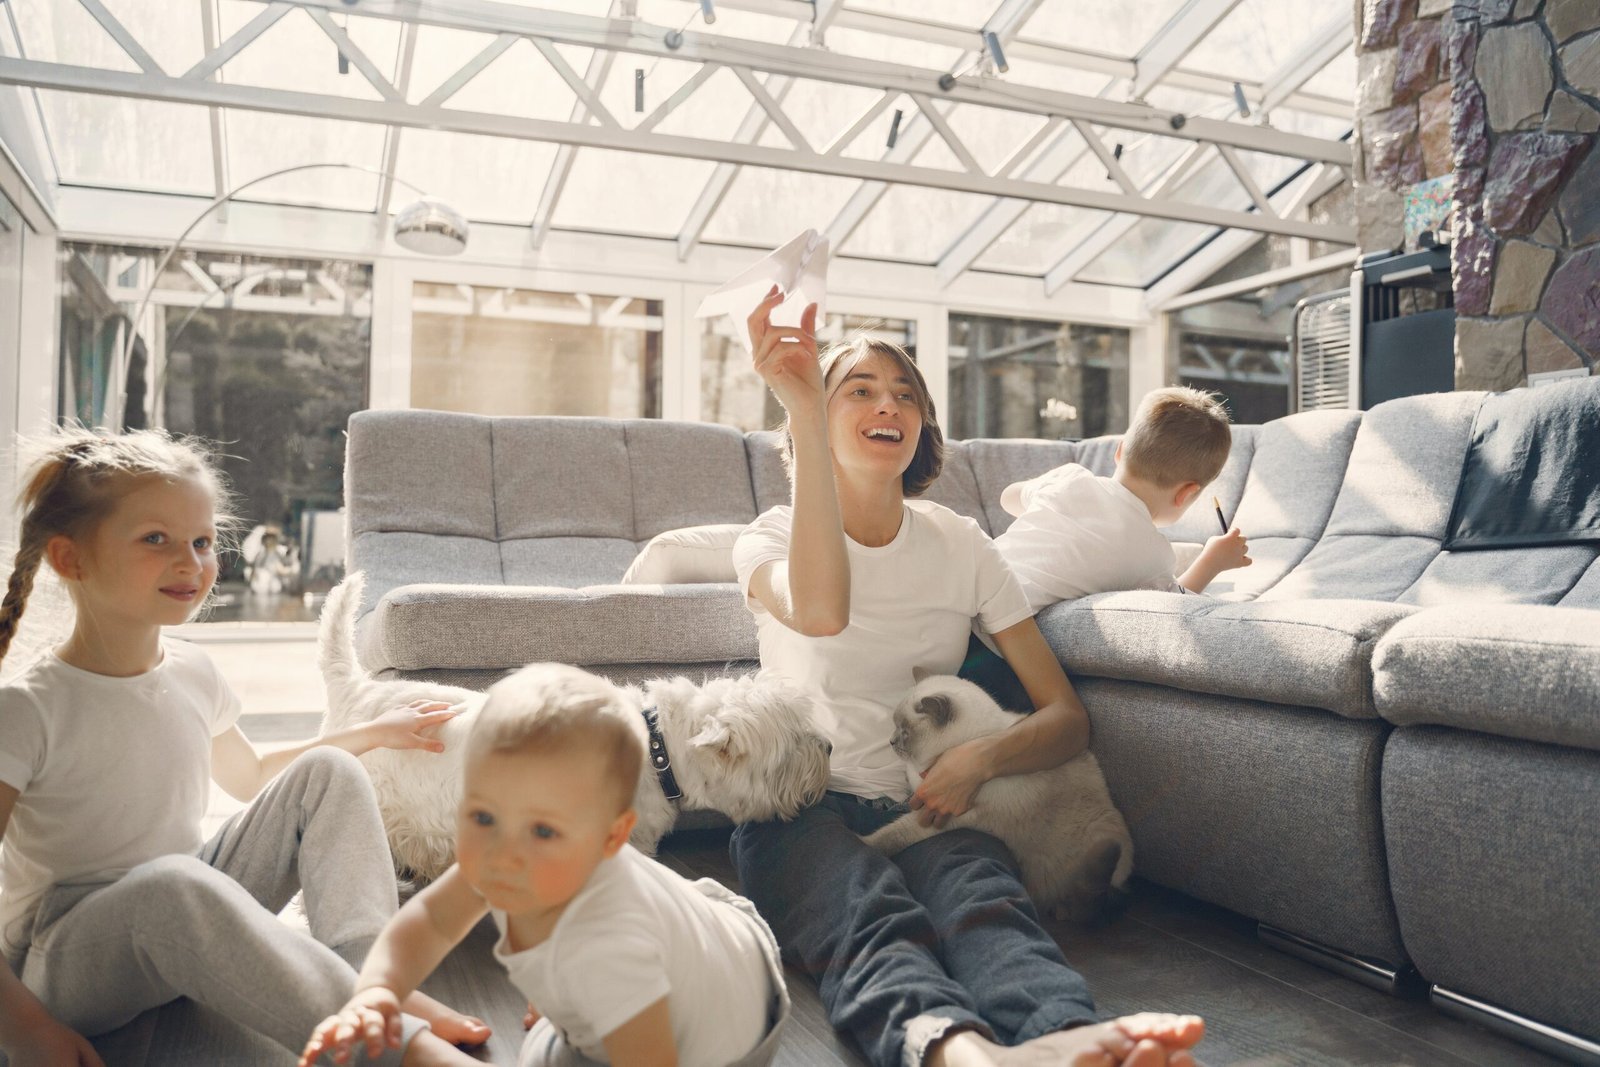 A family enjoys leisure time in a sunlit living room; a young woman and a child play with a paper airplane on a gray sofa, a toddler sits on the floor, and a second child draws in the background, accompanied by a white dog and a cat, suggesting a cozy, casual family moment at home.